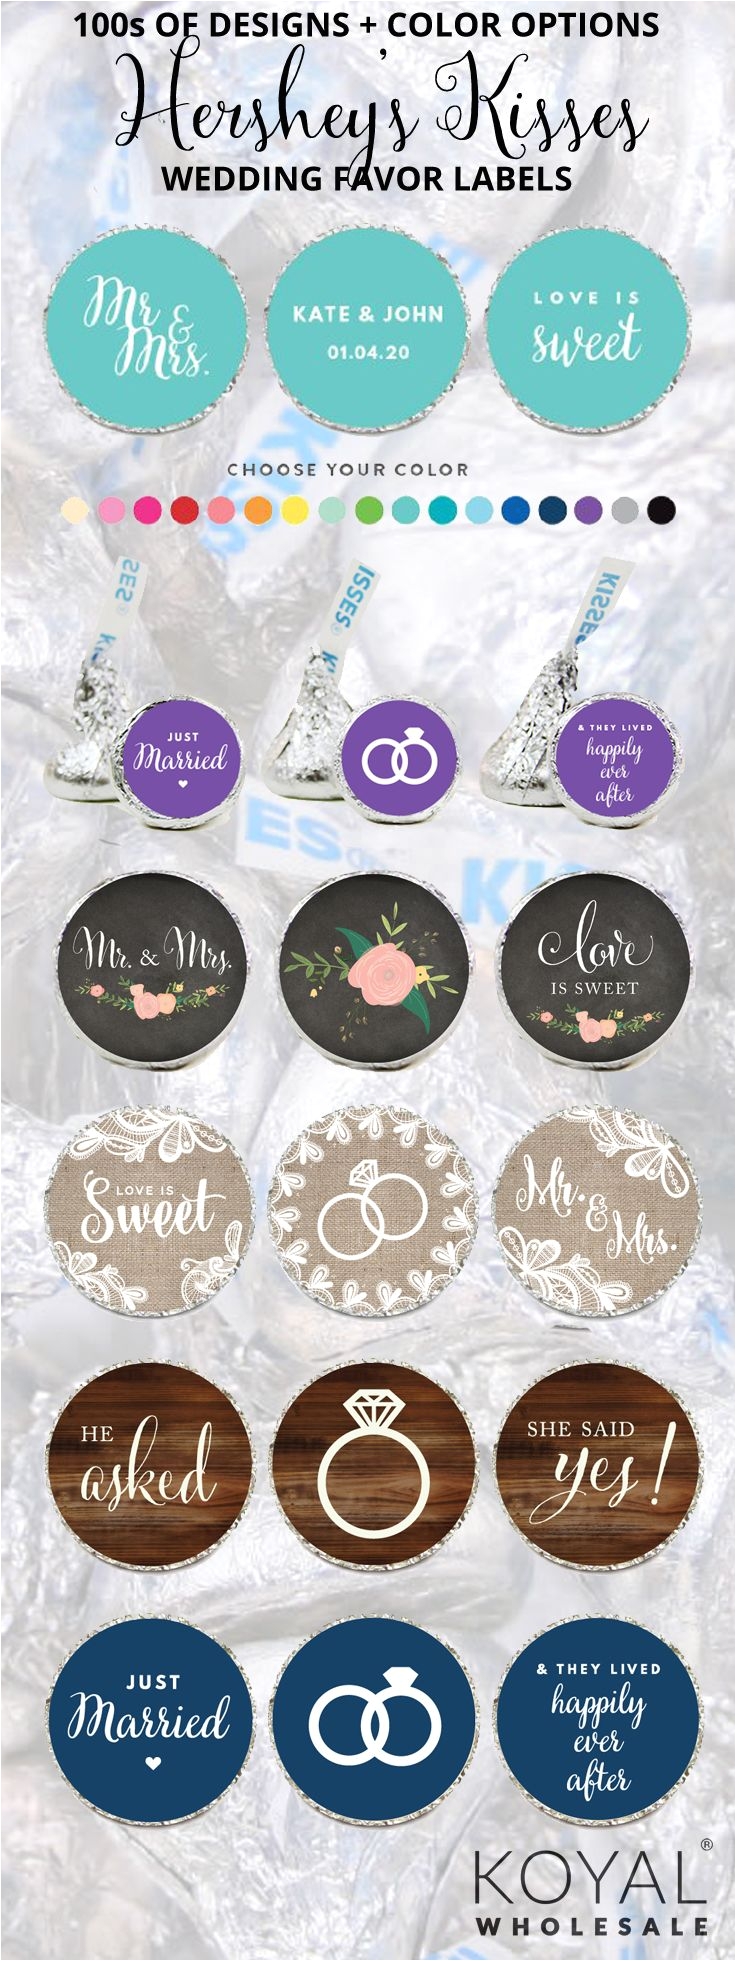 brides on a budget budget friendly wedding favor stickers for hershey s kisses lifesavers mints and lollipops hershey kiss wedding favor labels custom